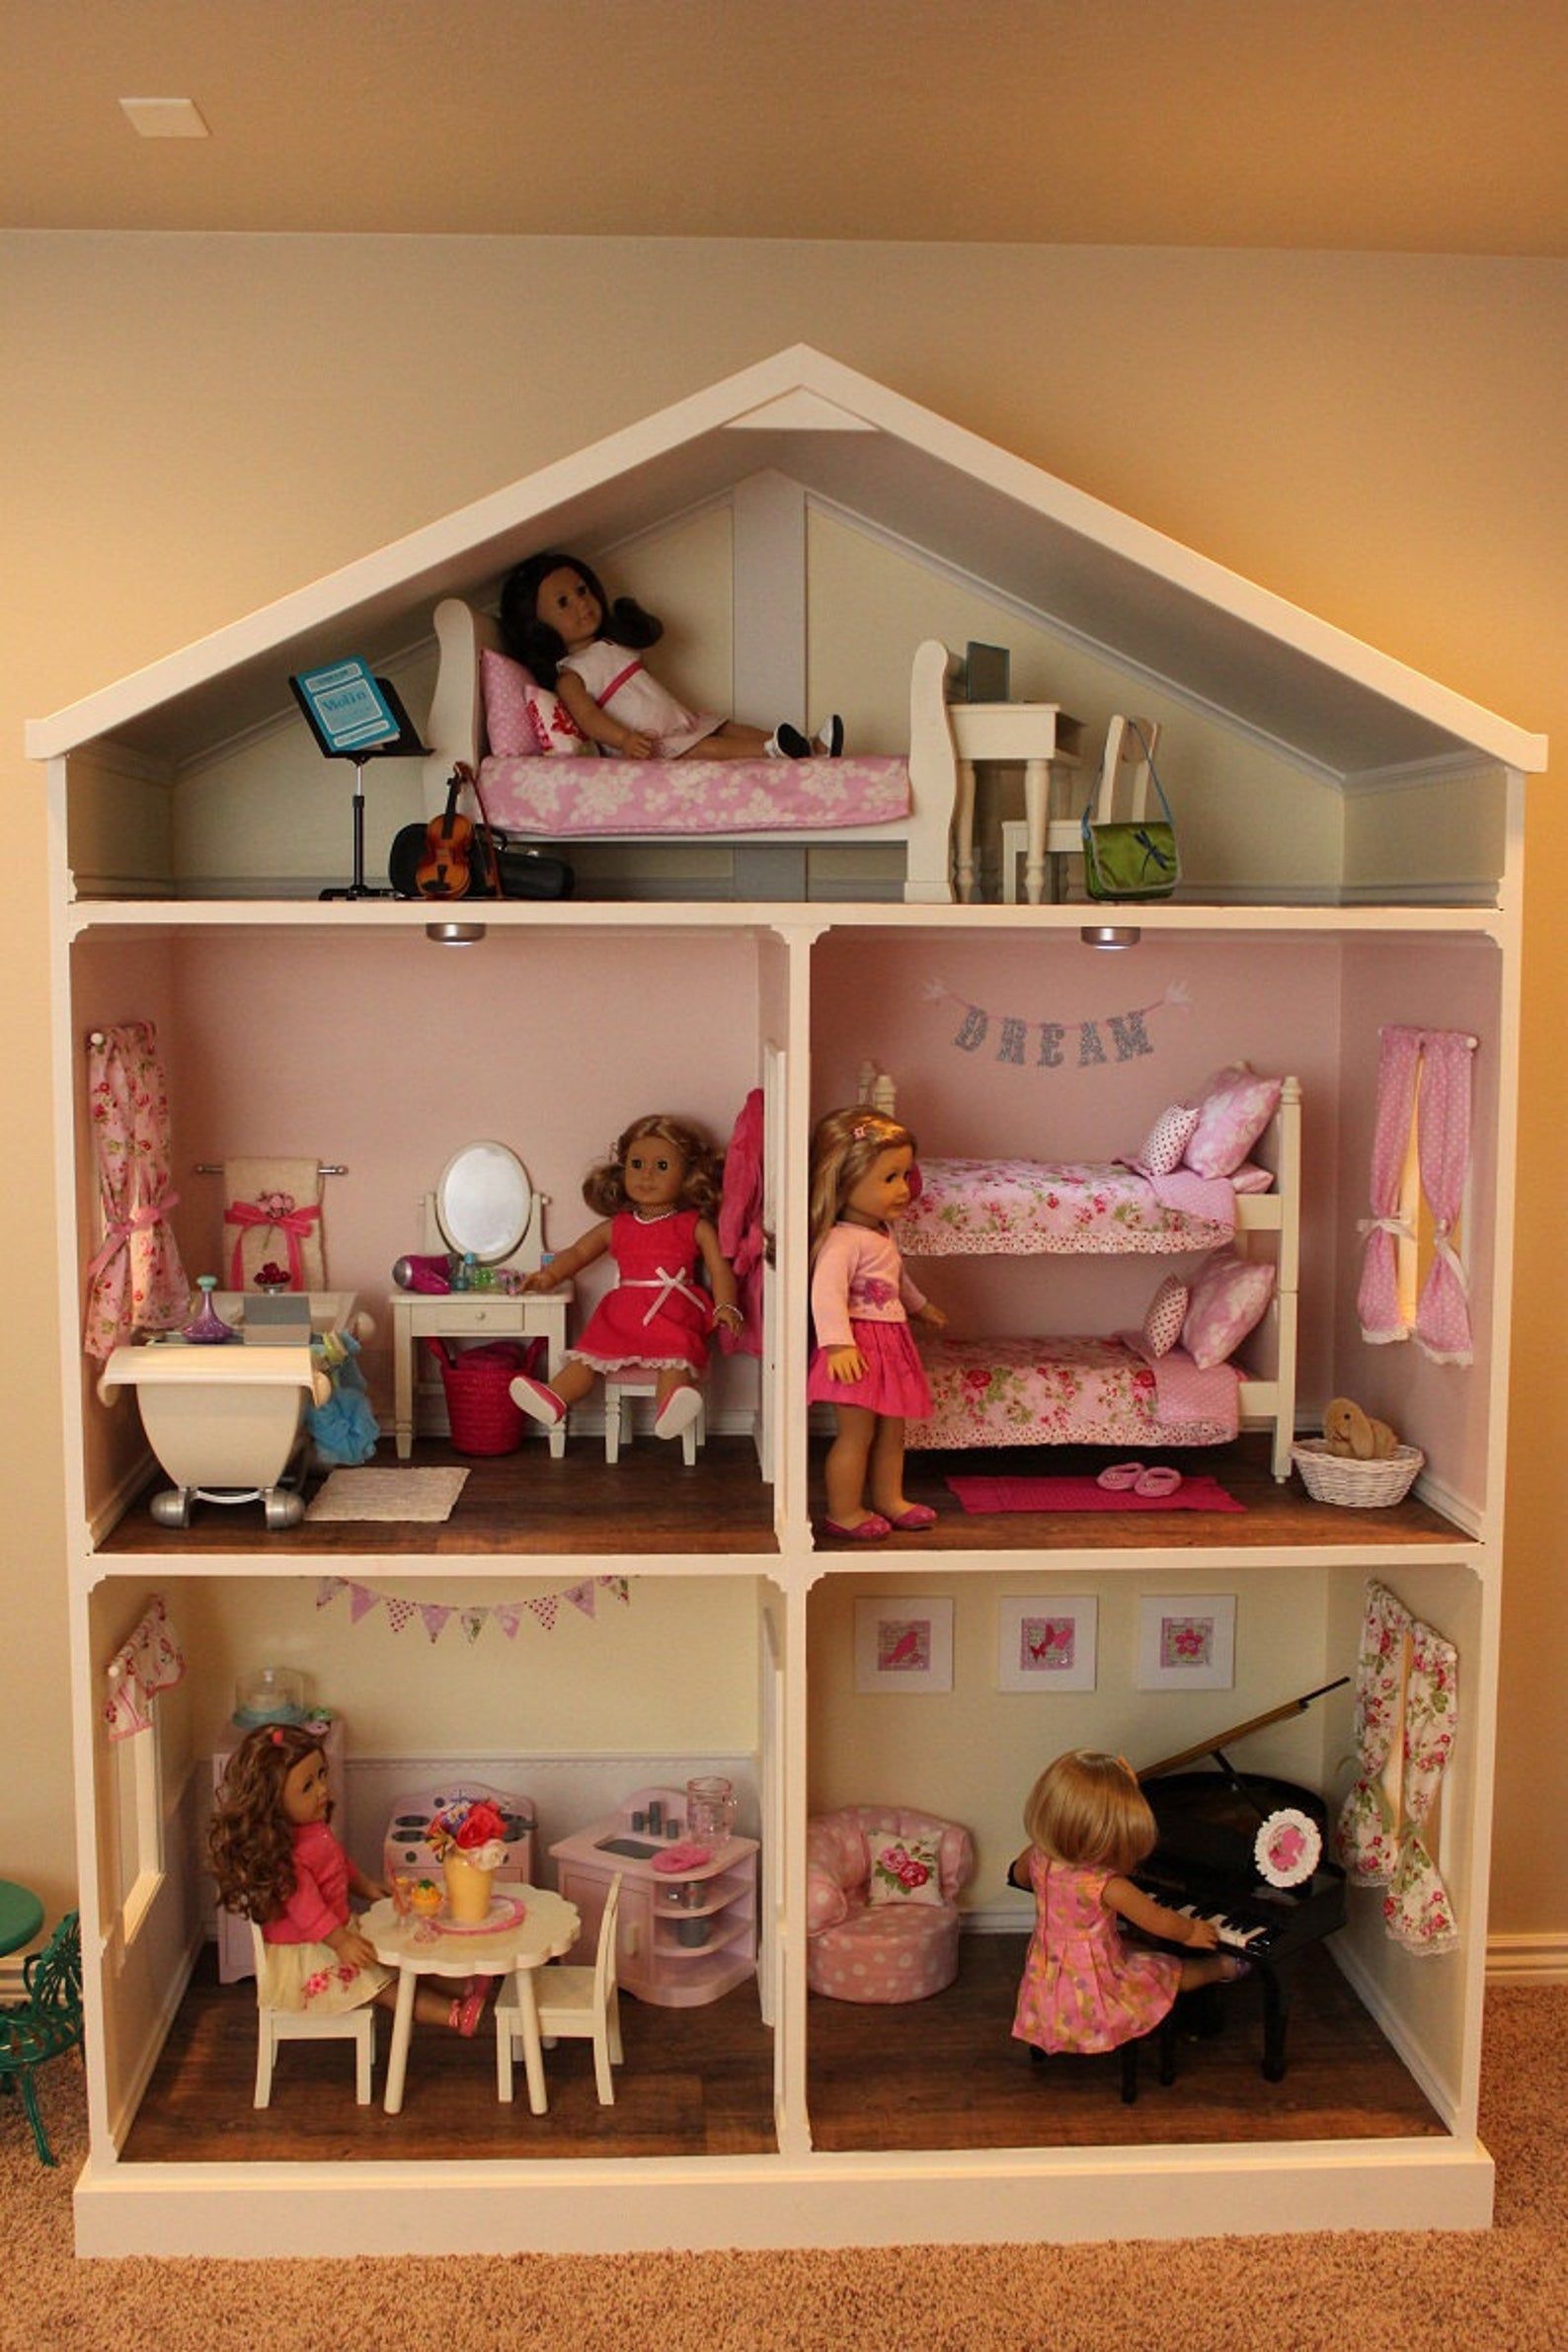 Doll House Plans for American Girl or 18 inch dolls - 5 Room - NOT ACTUAL HOUSE - Doll House Plans for American Girl or 18 inch dolls - 5 Room - NOT ACTUAL HOUSE -   19 diy House doll ideas